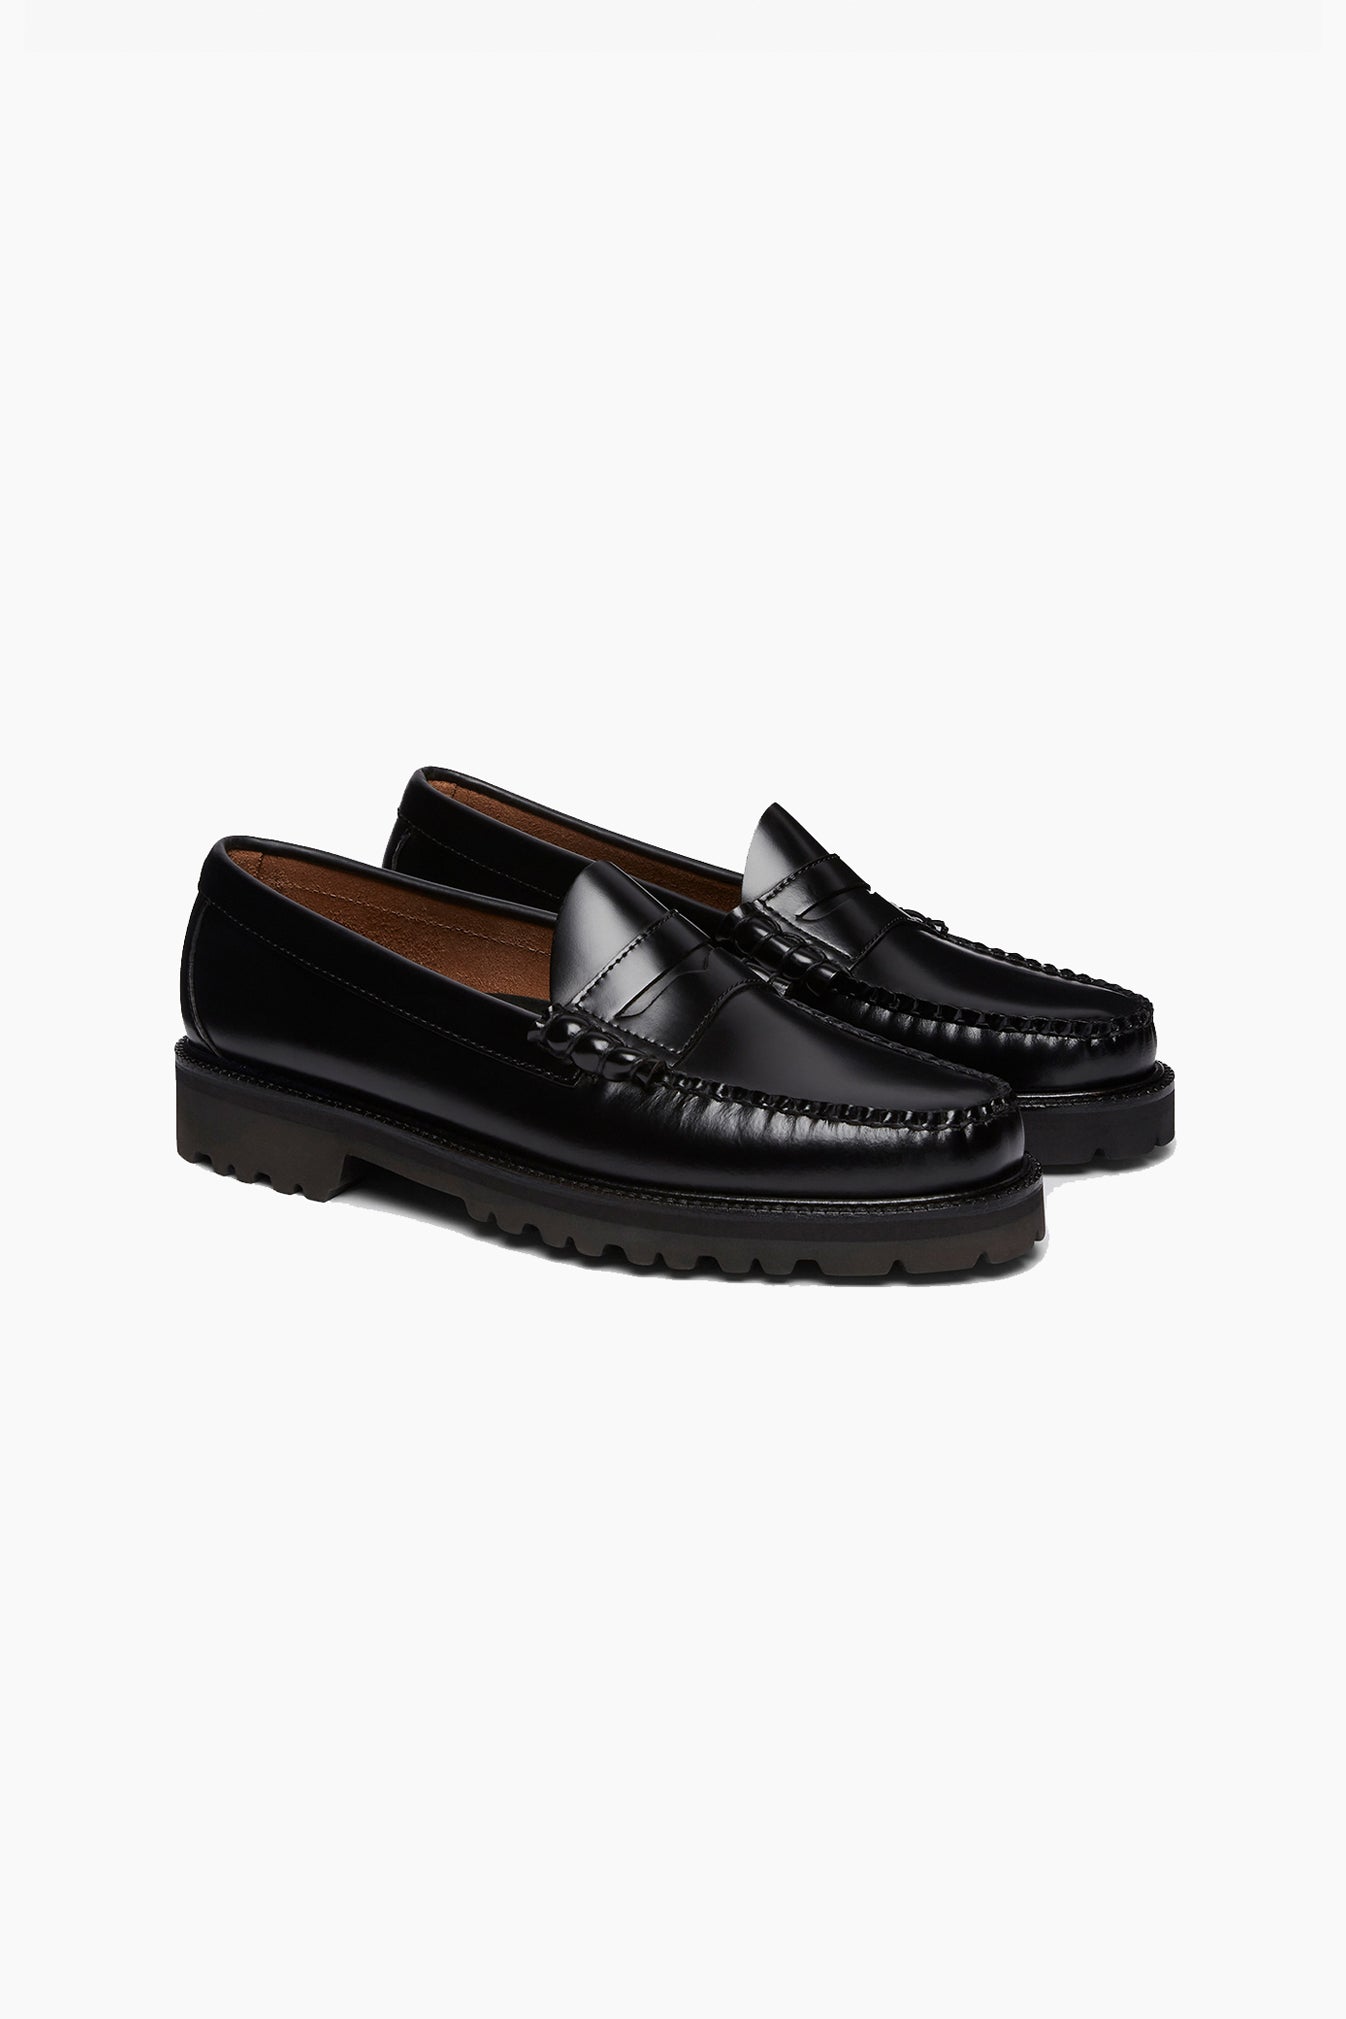 Weejuns loafers in black leather